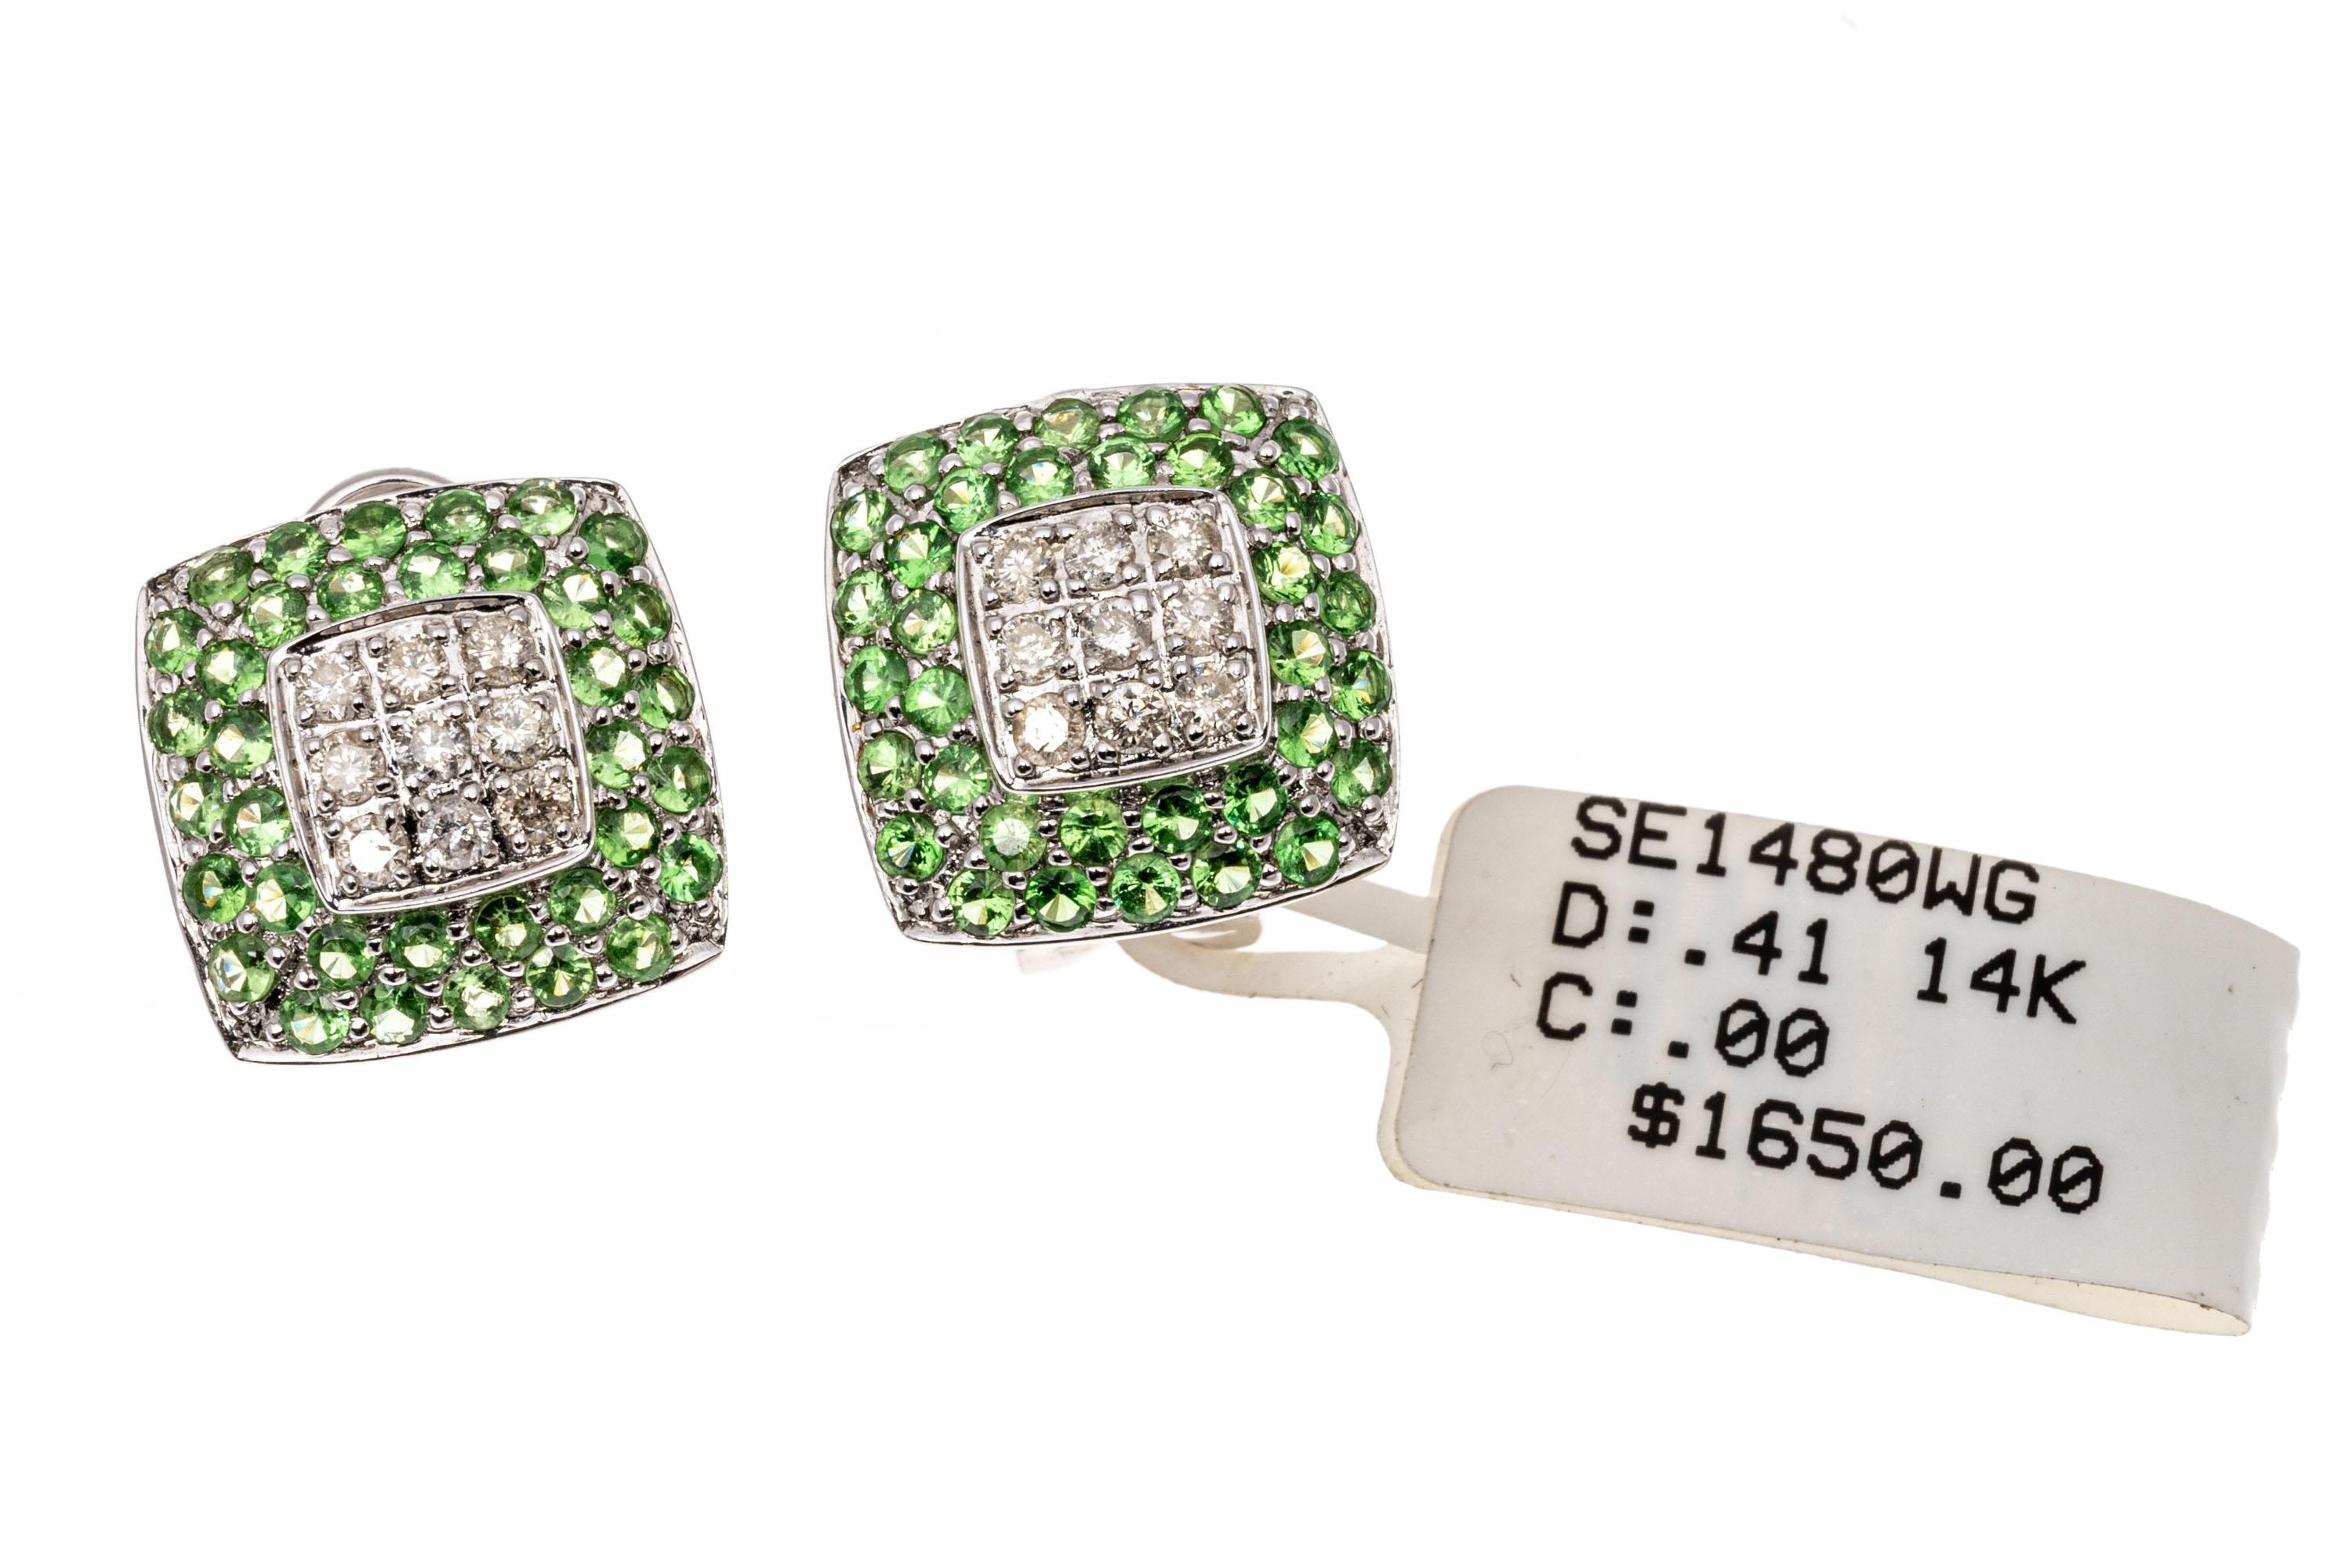 18k white gold earrings. These magnificent earrings are a square button style, set with a square center of round faceted white diamonds 0.41 TCW, bordered by round faceted light green tsavorite garnets. All of the stones are pave set, and the